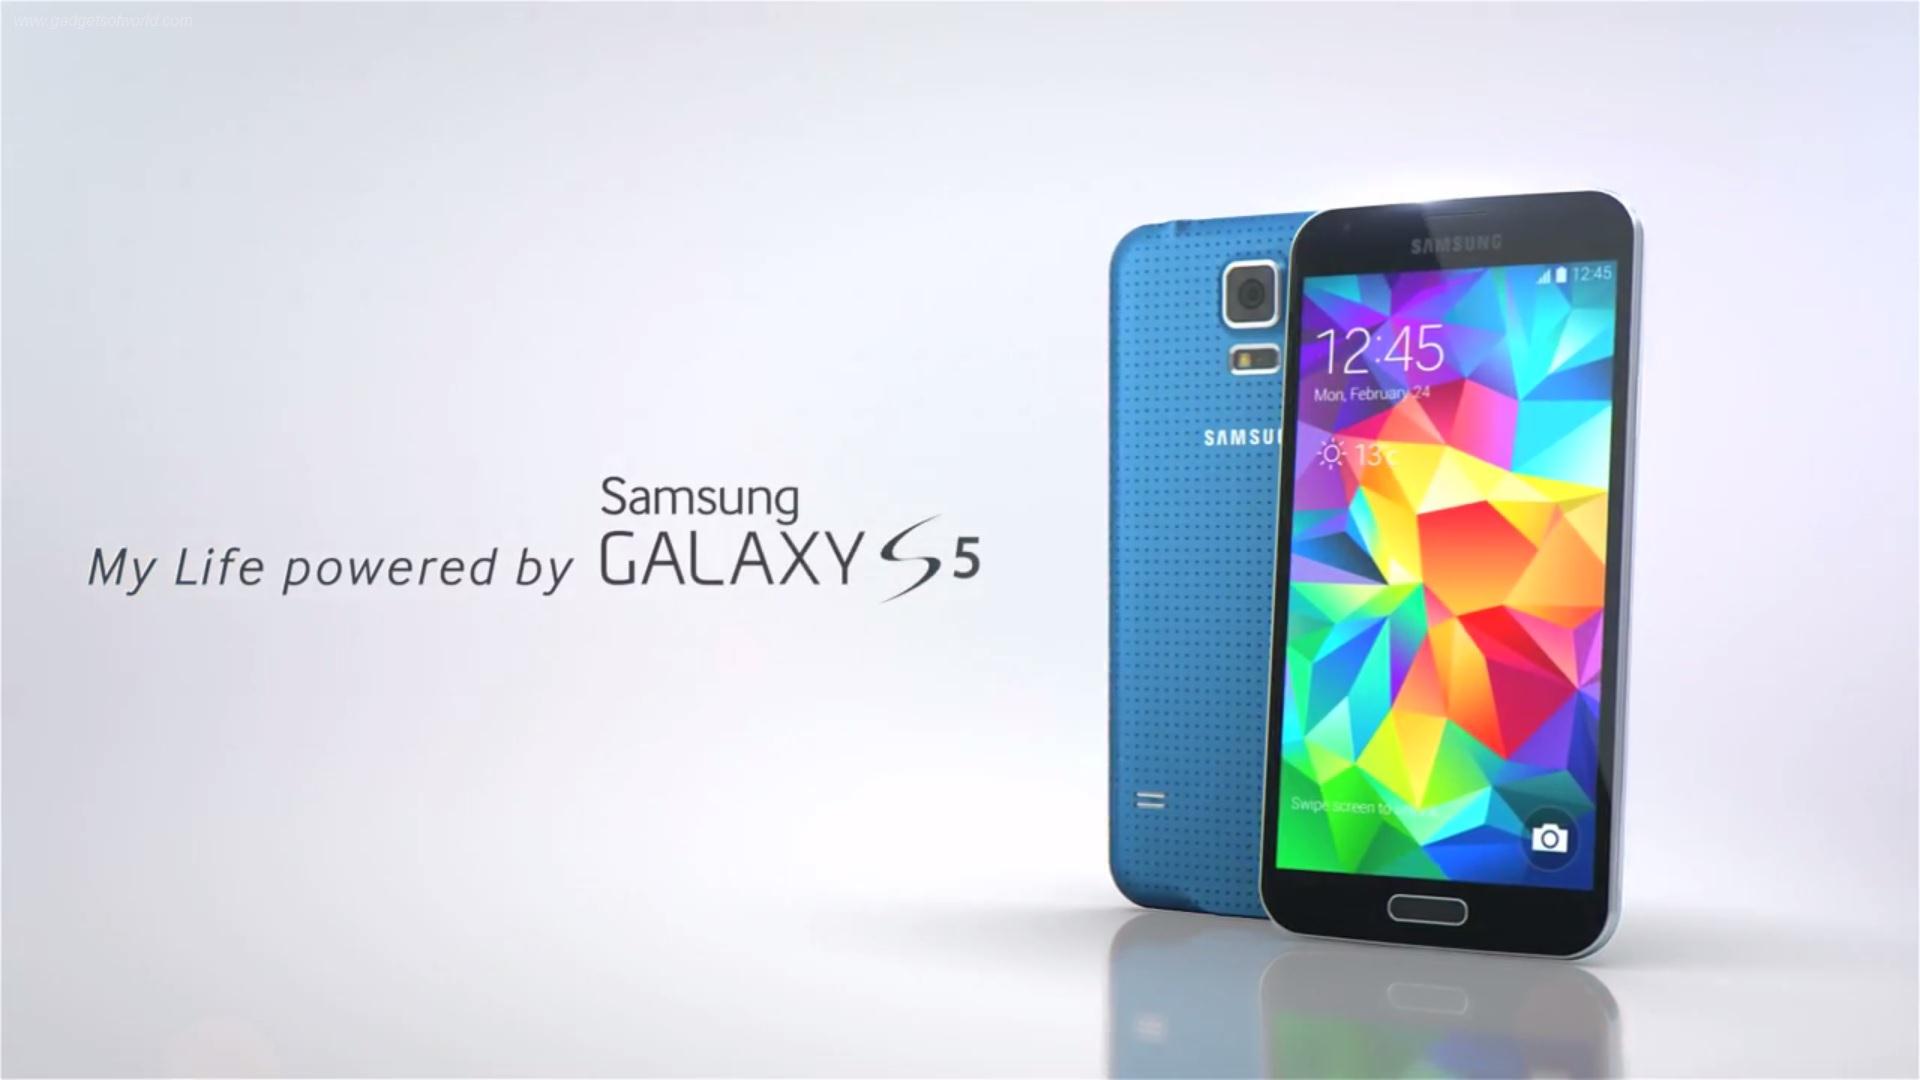 Samsung-galaxy-s5-honest-review-after-6-months-use